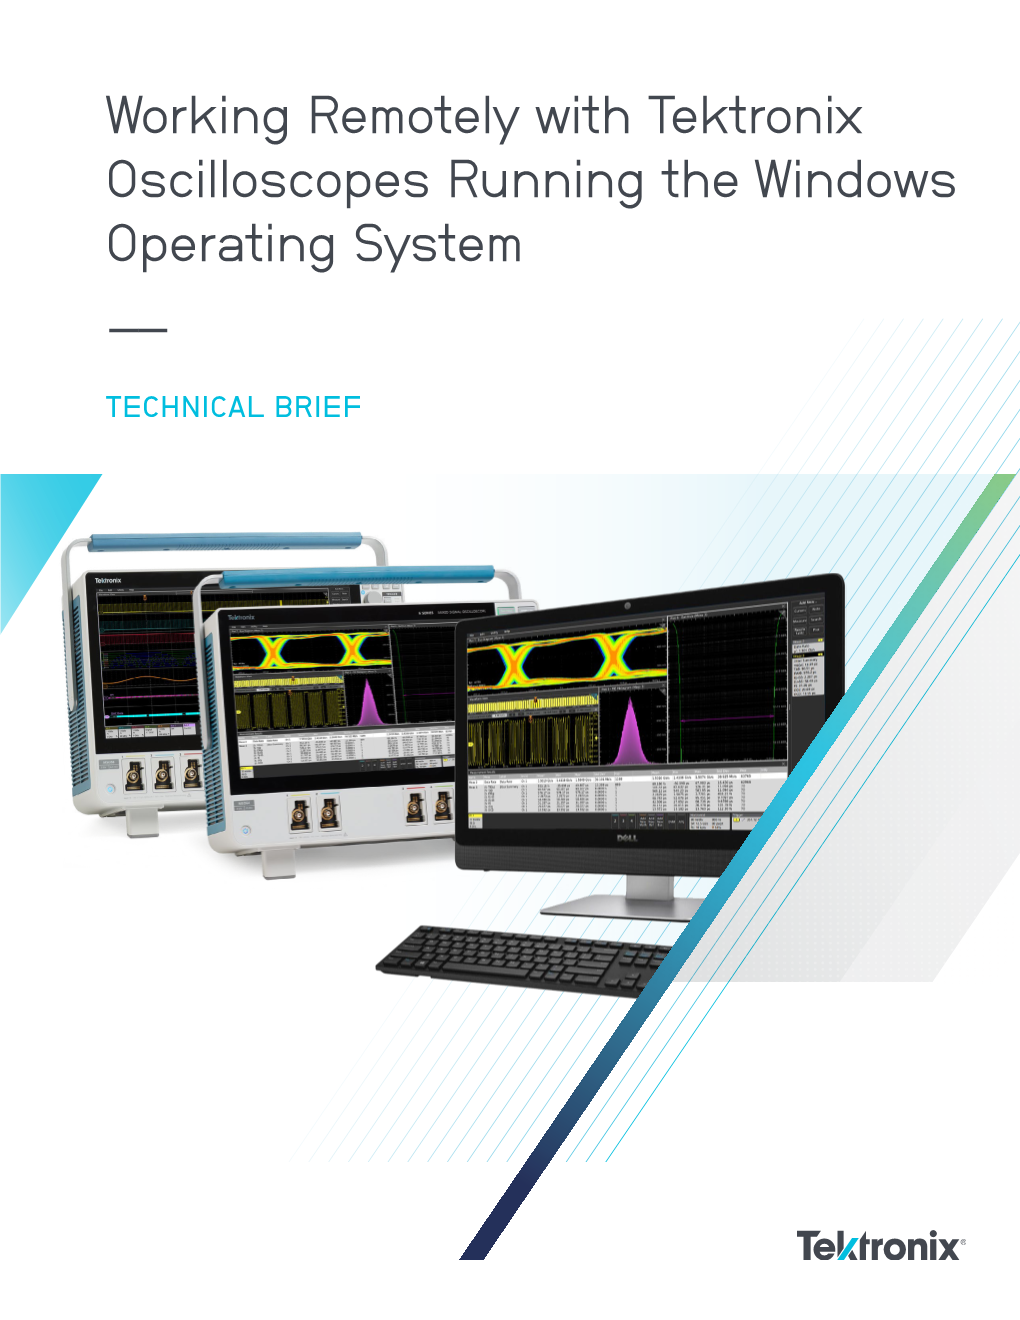 Working Remotely with Tektronix Oscilloscopes Running the Windows Operating System ––